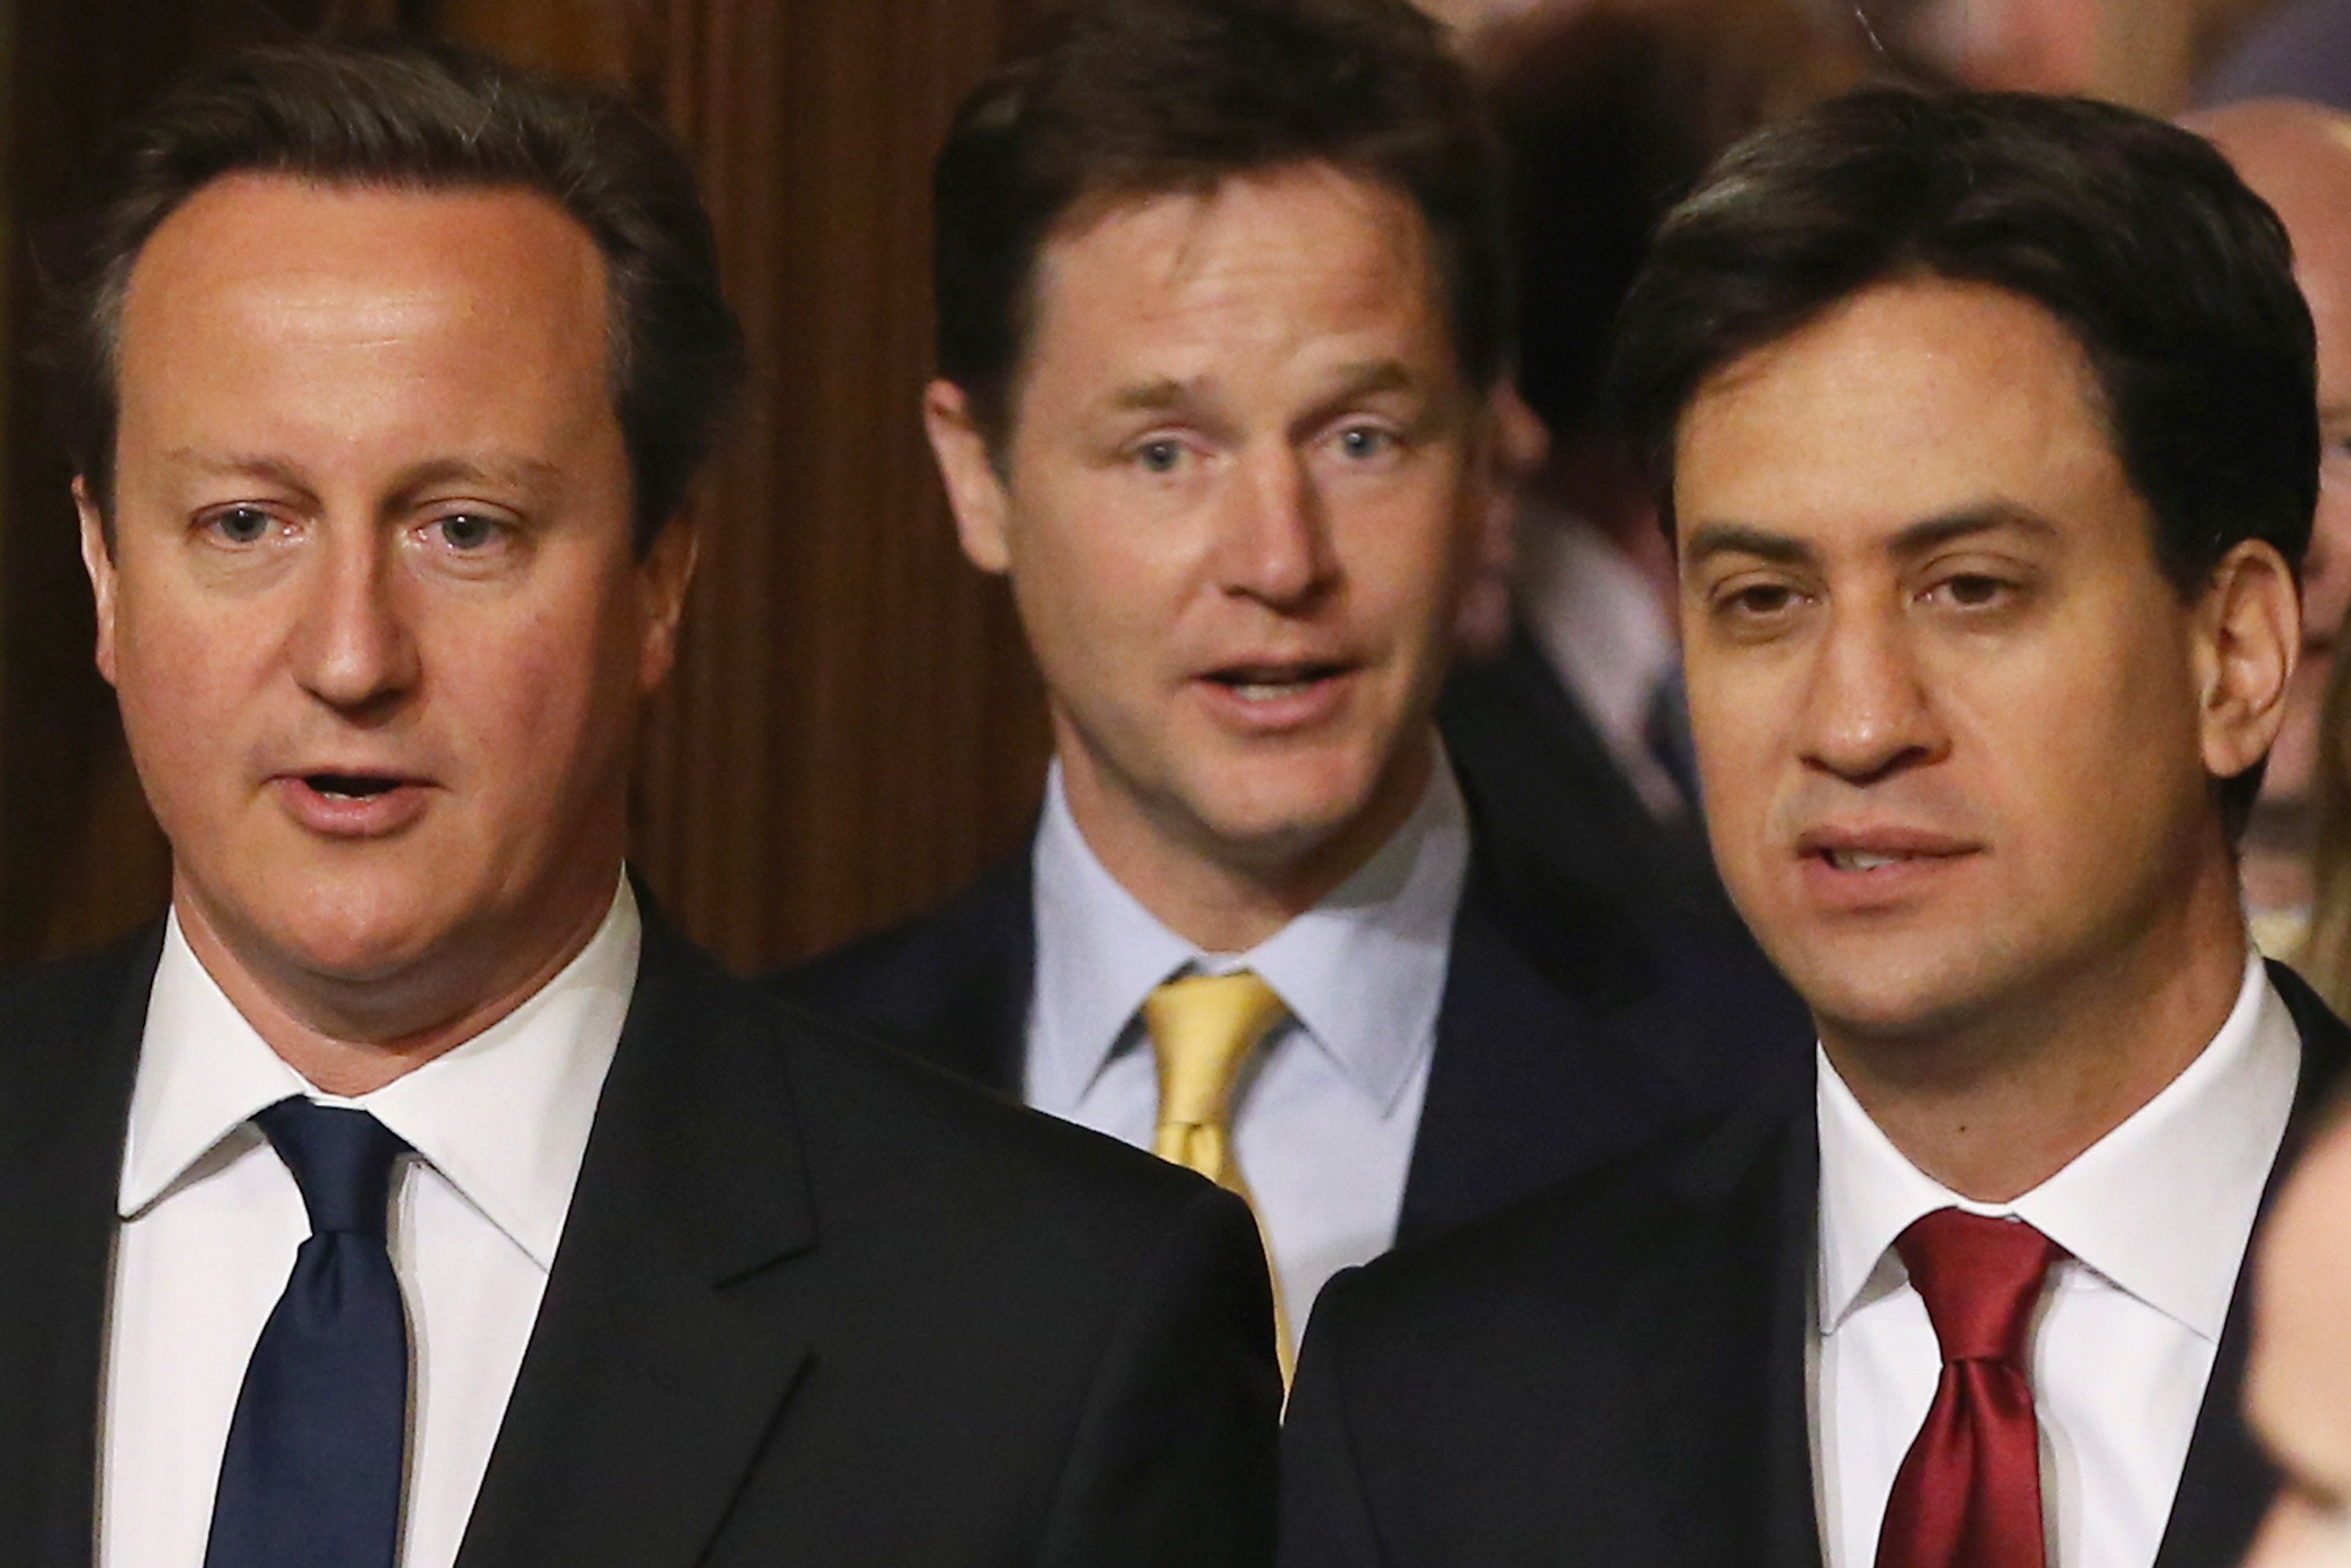 Dave, Nick and Ed have been flirting desperately with the voting public